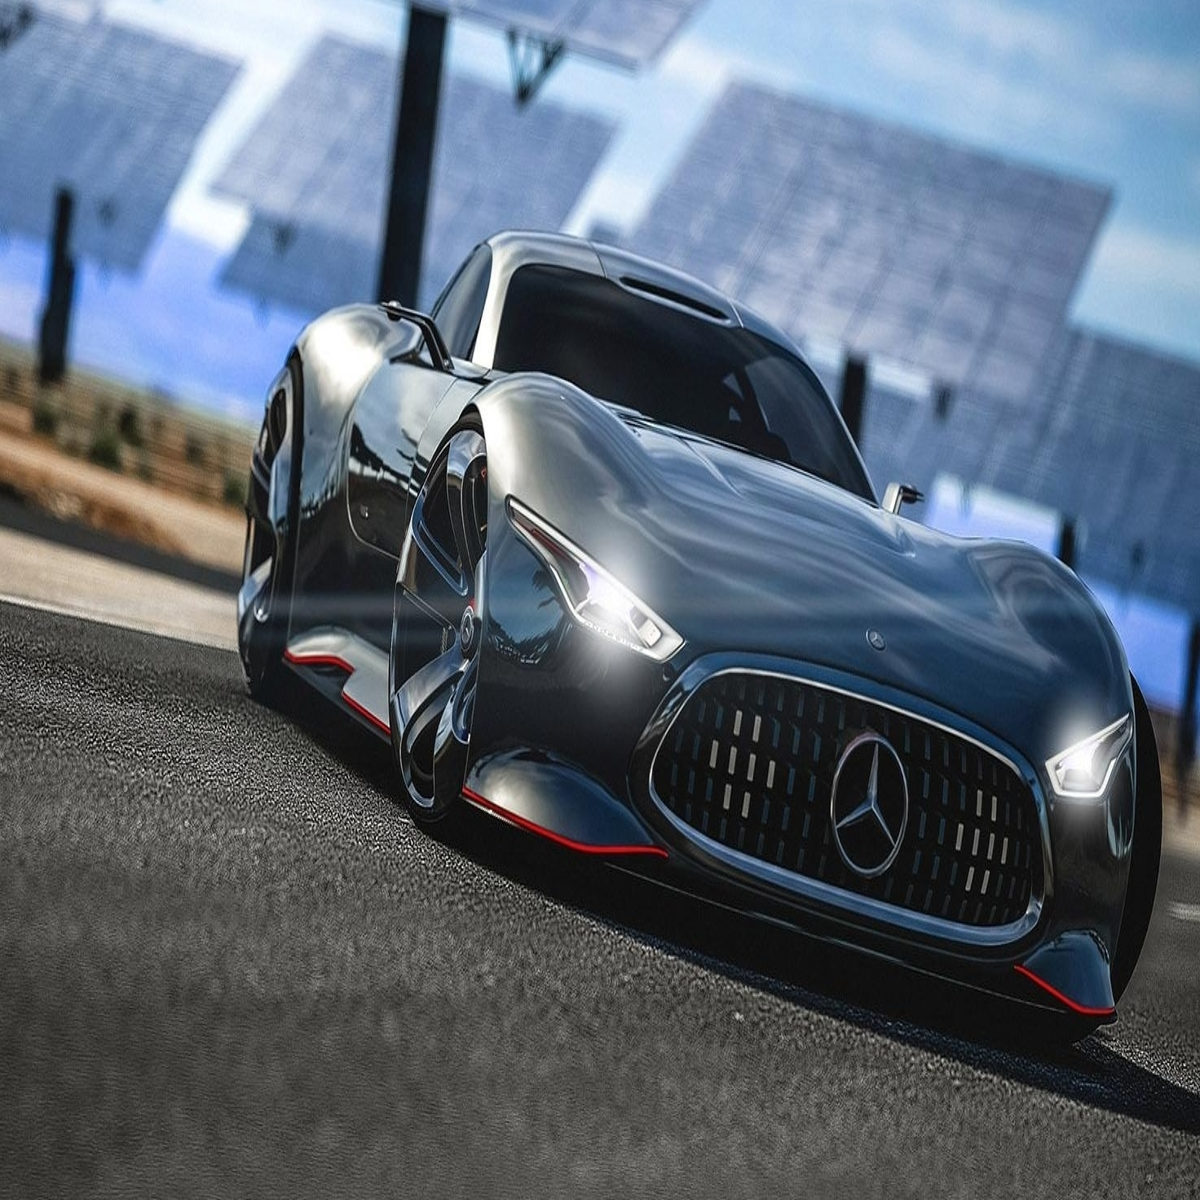 GT7 may just be a GT Sport add-on following Polyphony's online